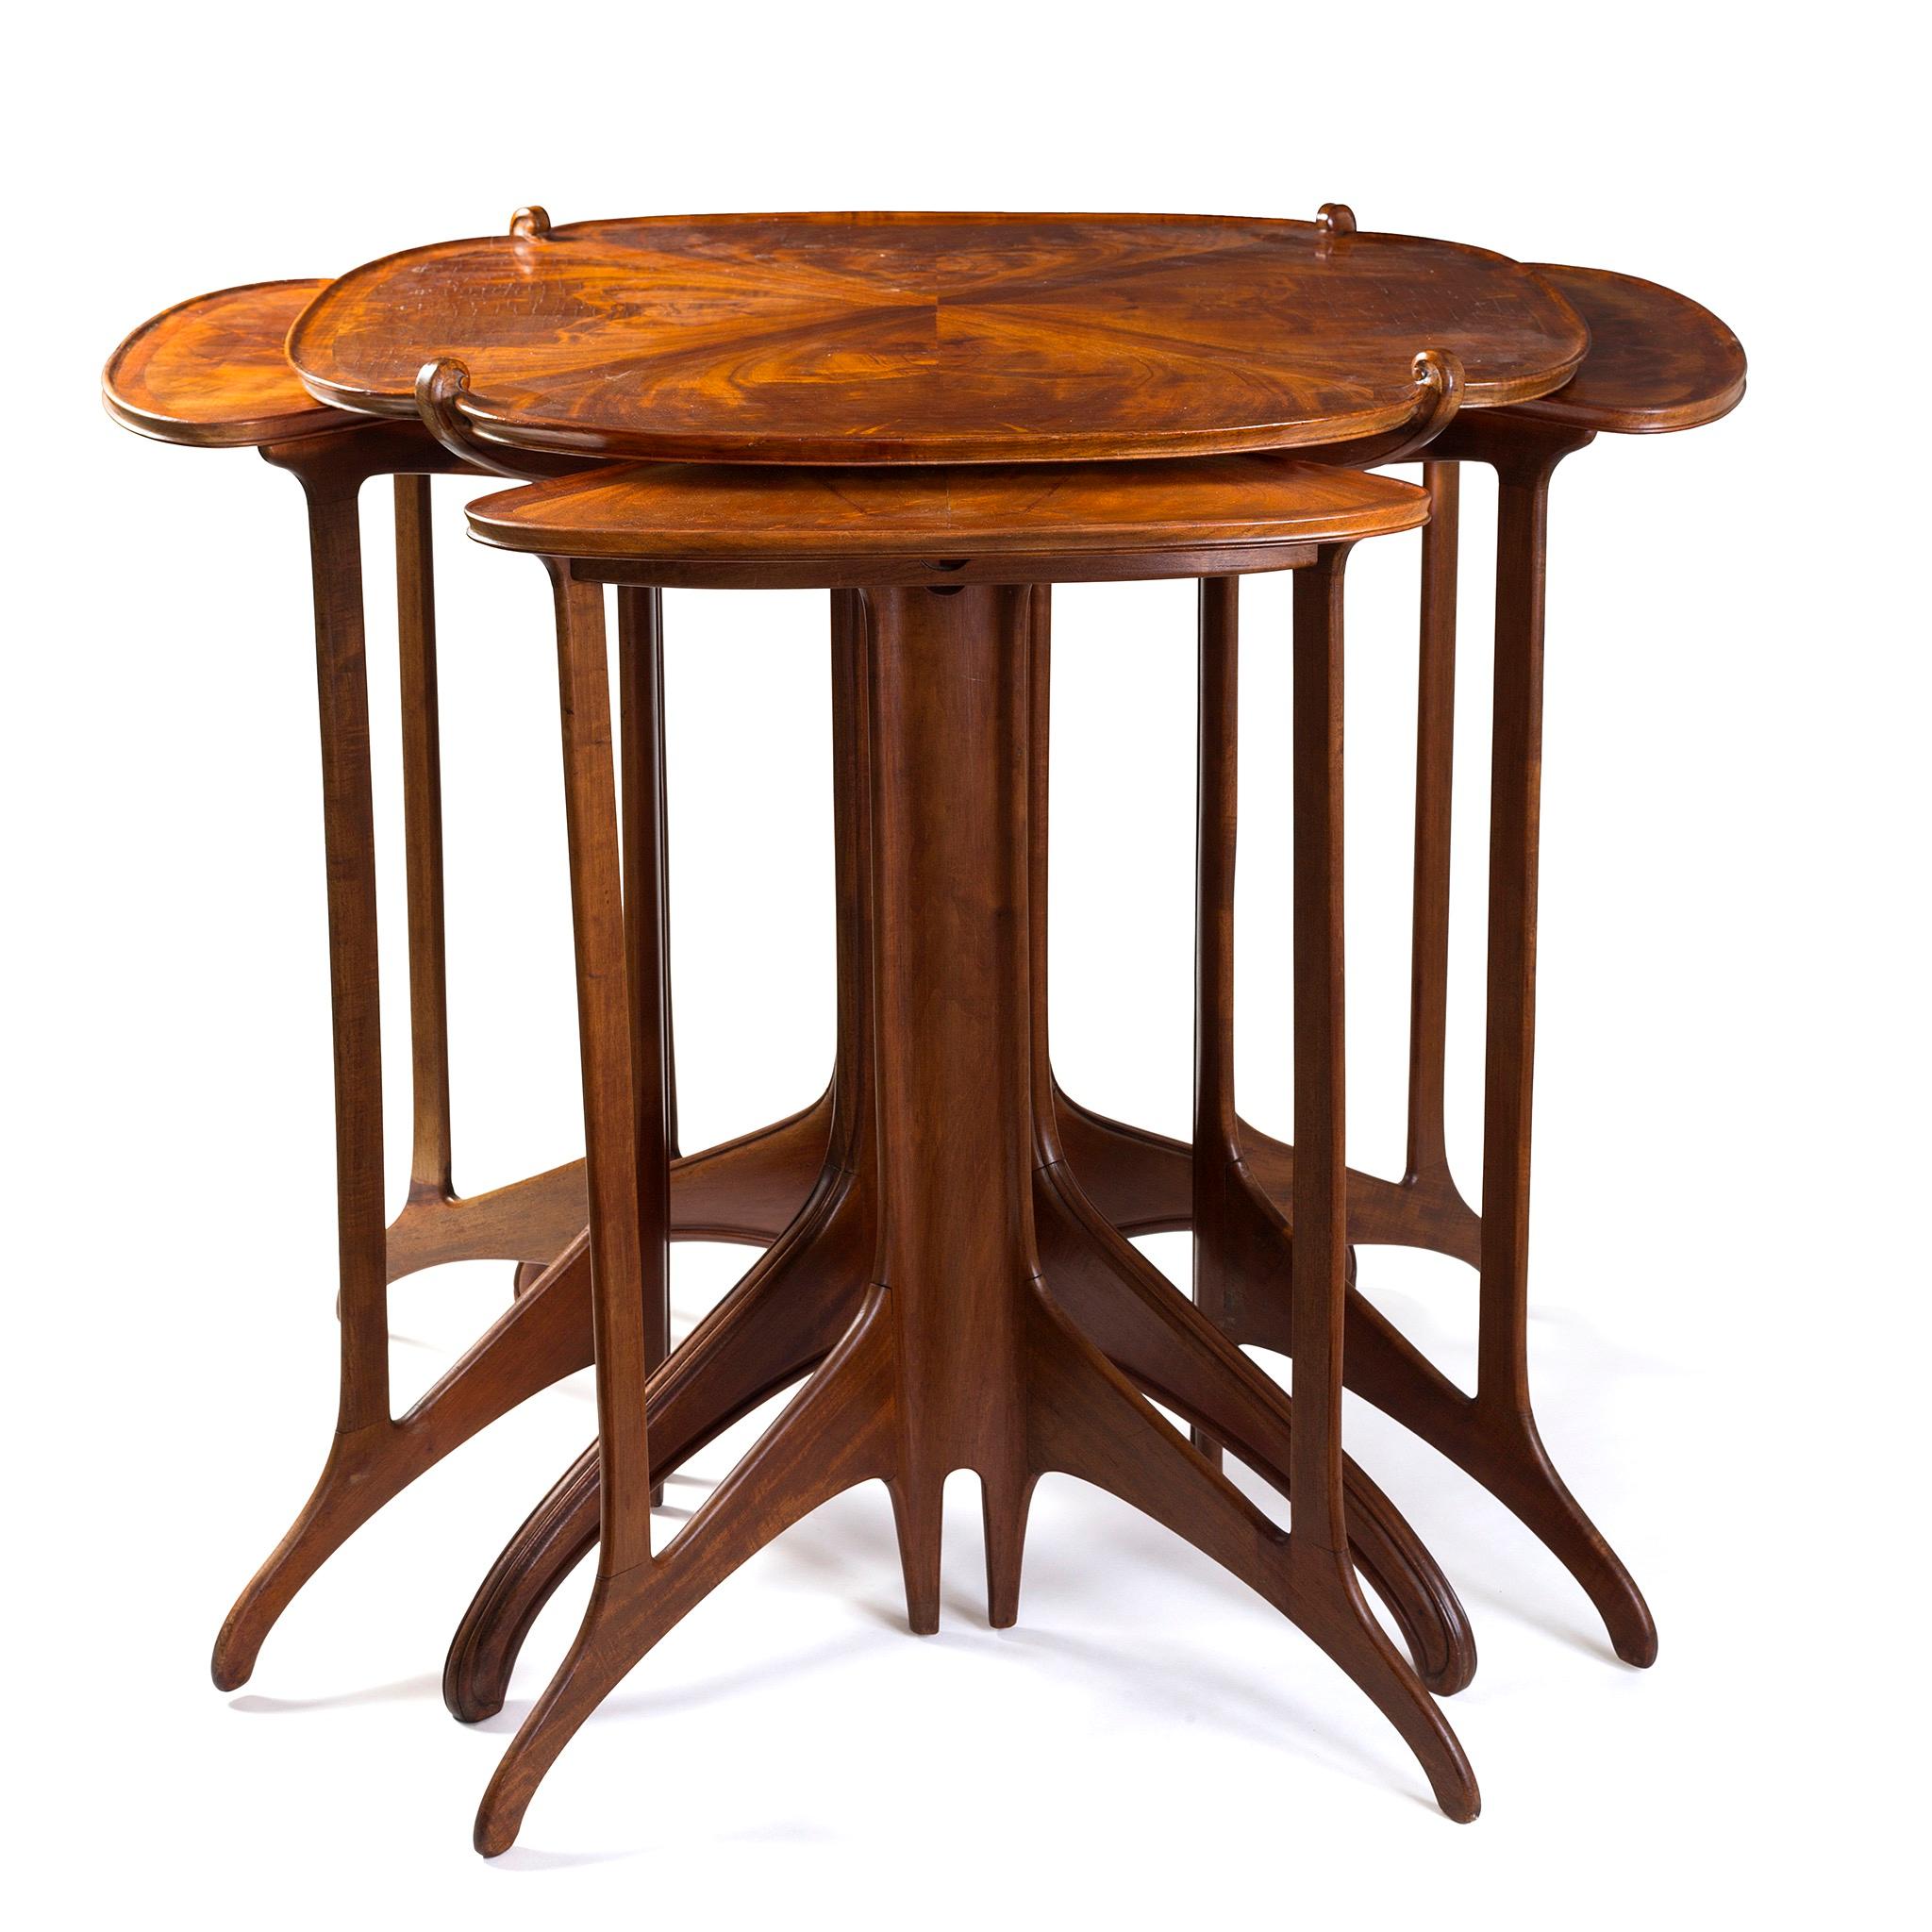 Dynamism meets beauty in this refined composition in padauk and Madagascar rosewood by Eugène Gaillard. The aptly-titled 